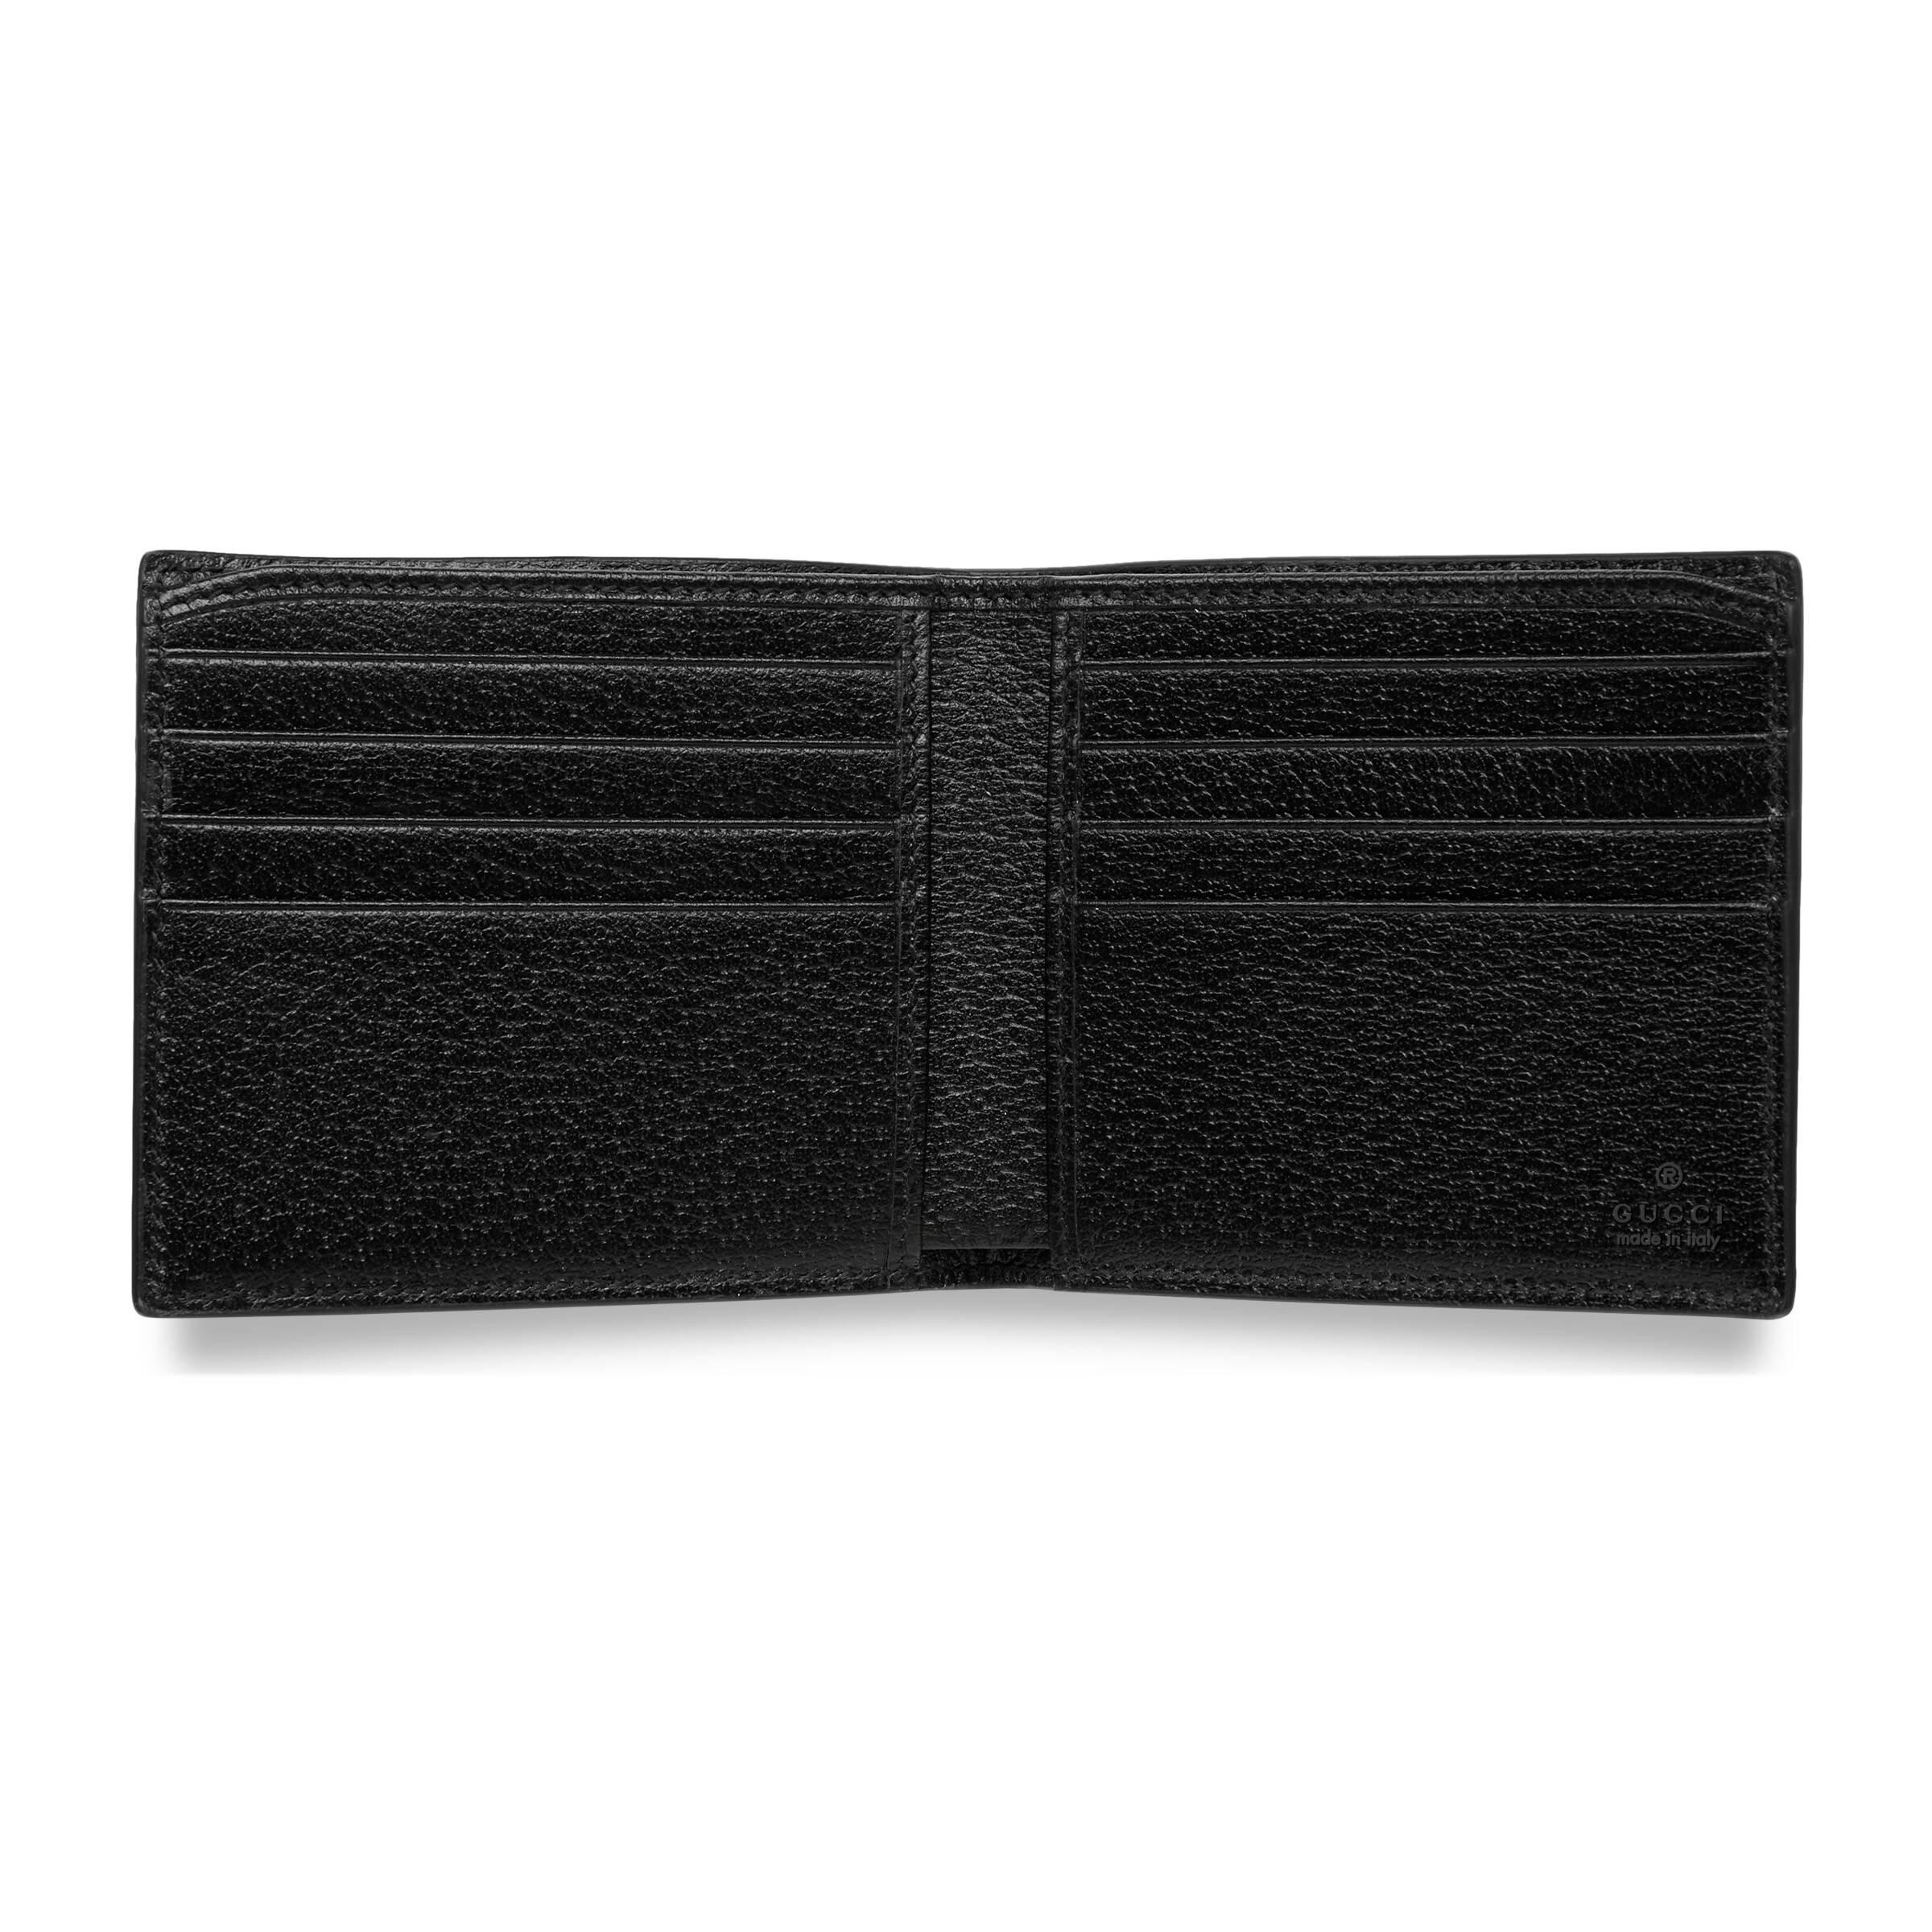 Gucci Off The Grid Billfold Wallet in Yellow for Men